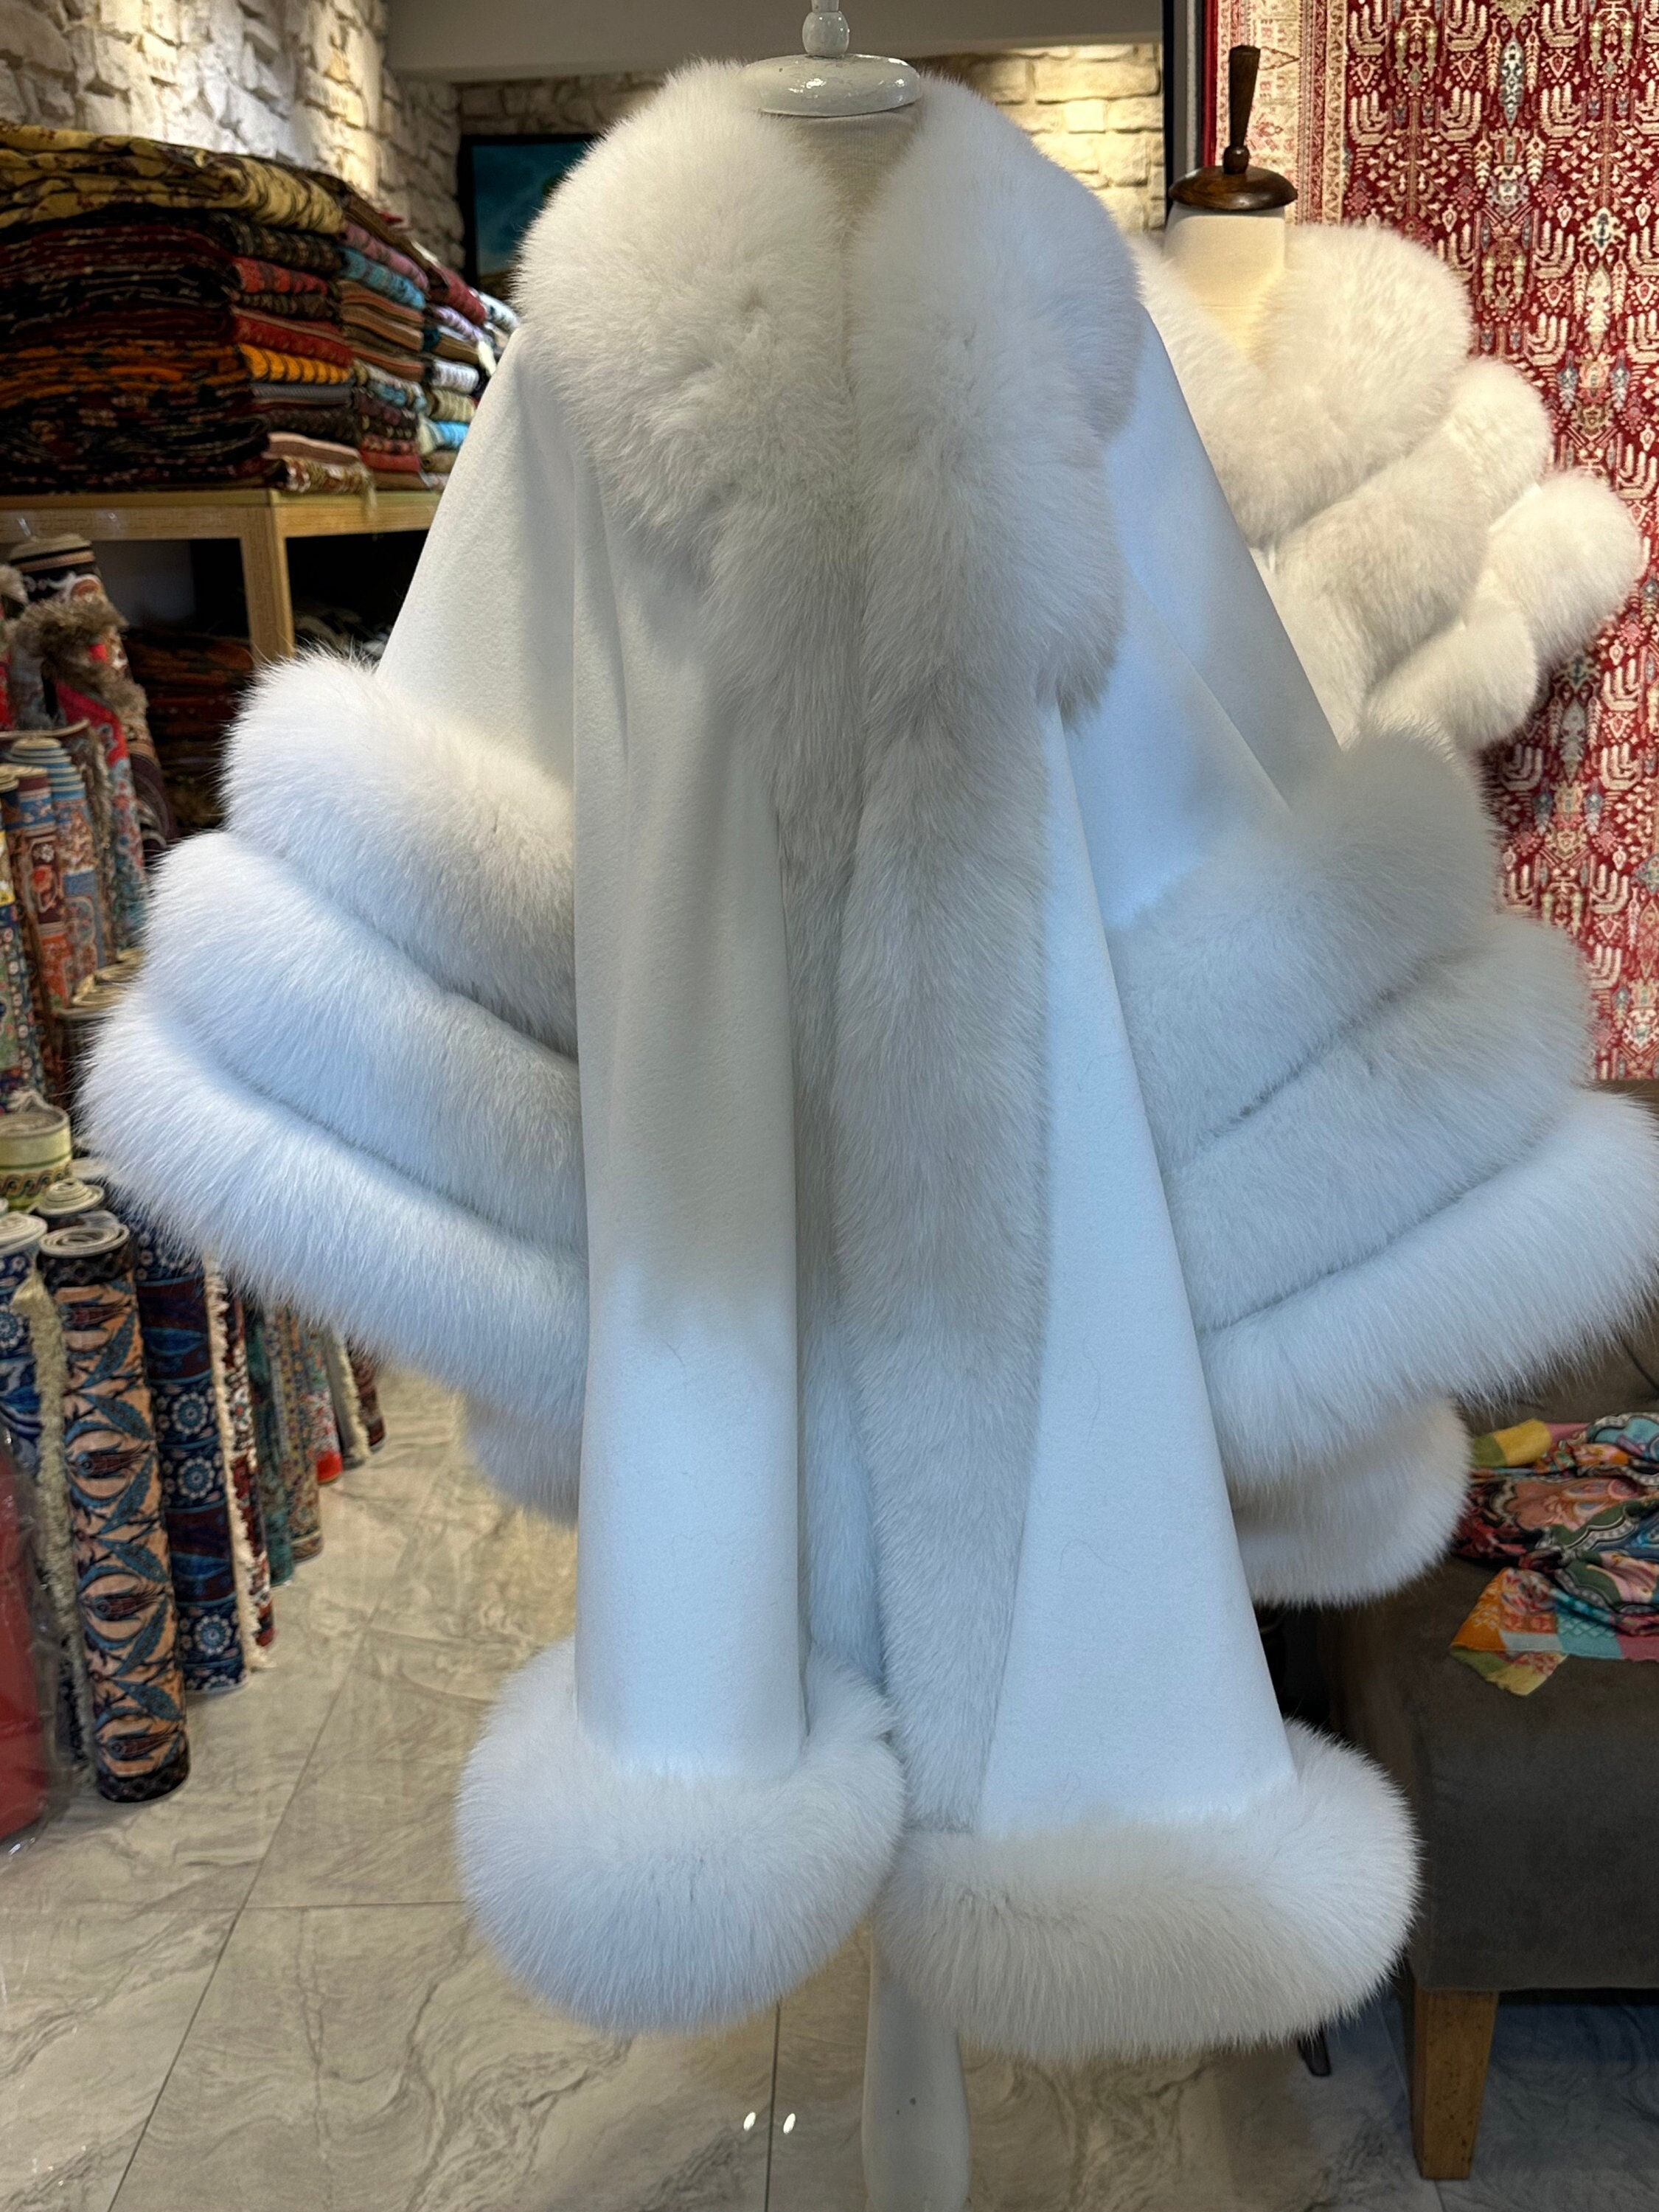 White Cashmere Cape with Genuine Fox Fur Trim for Women, One size fits all.